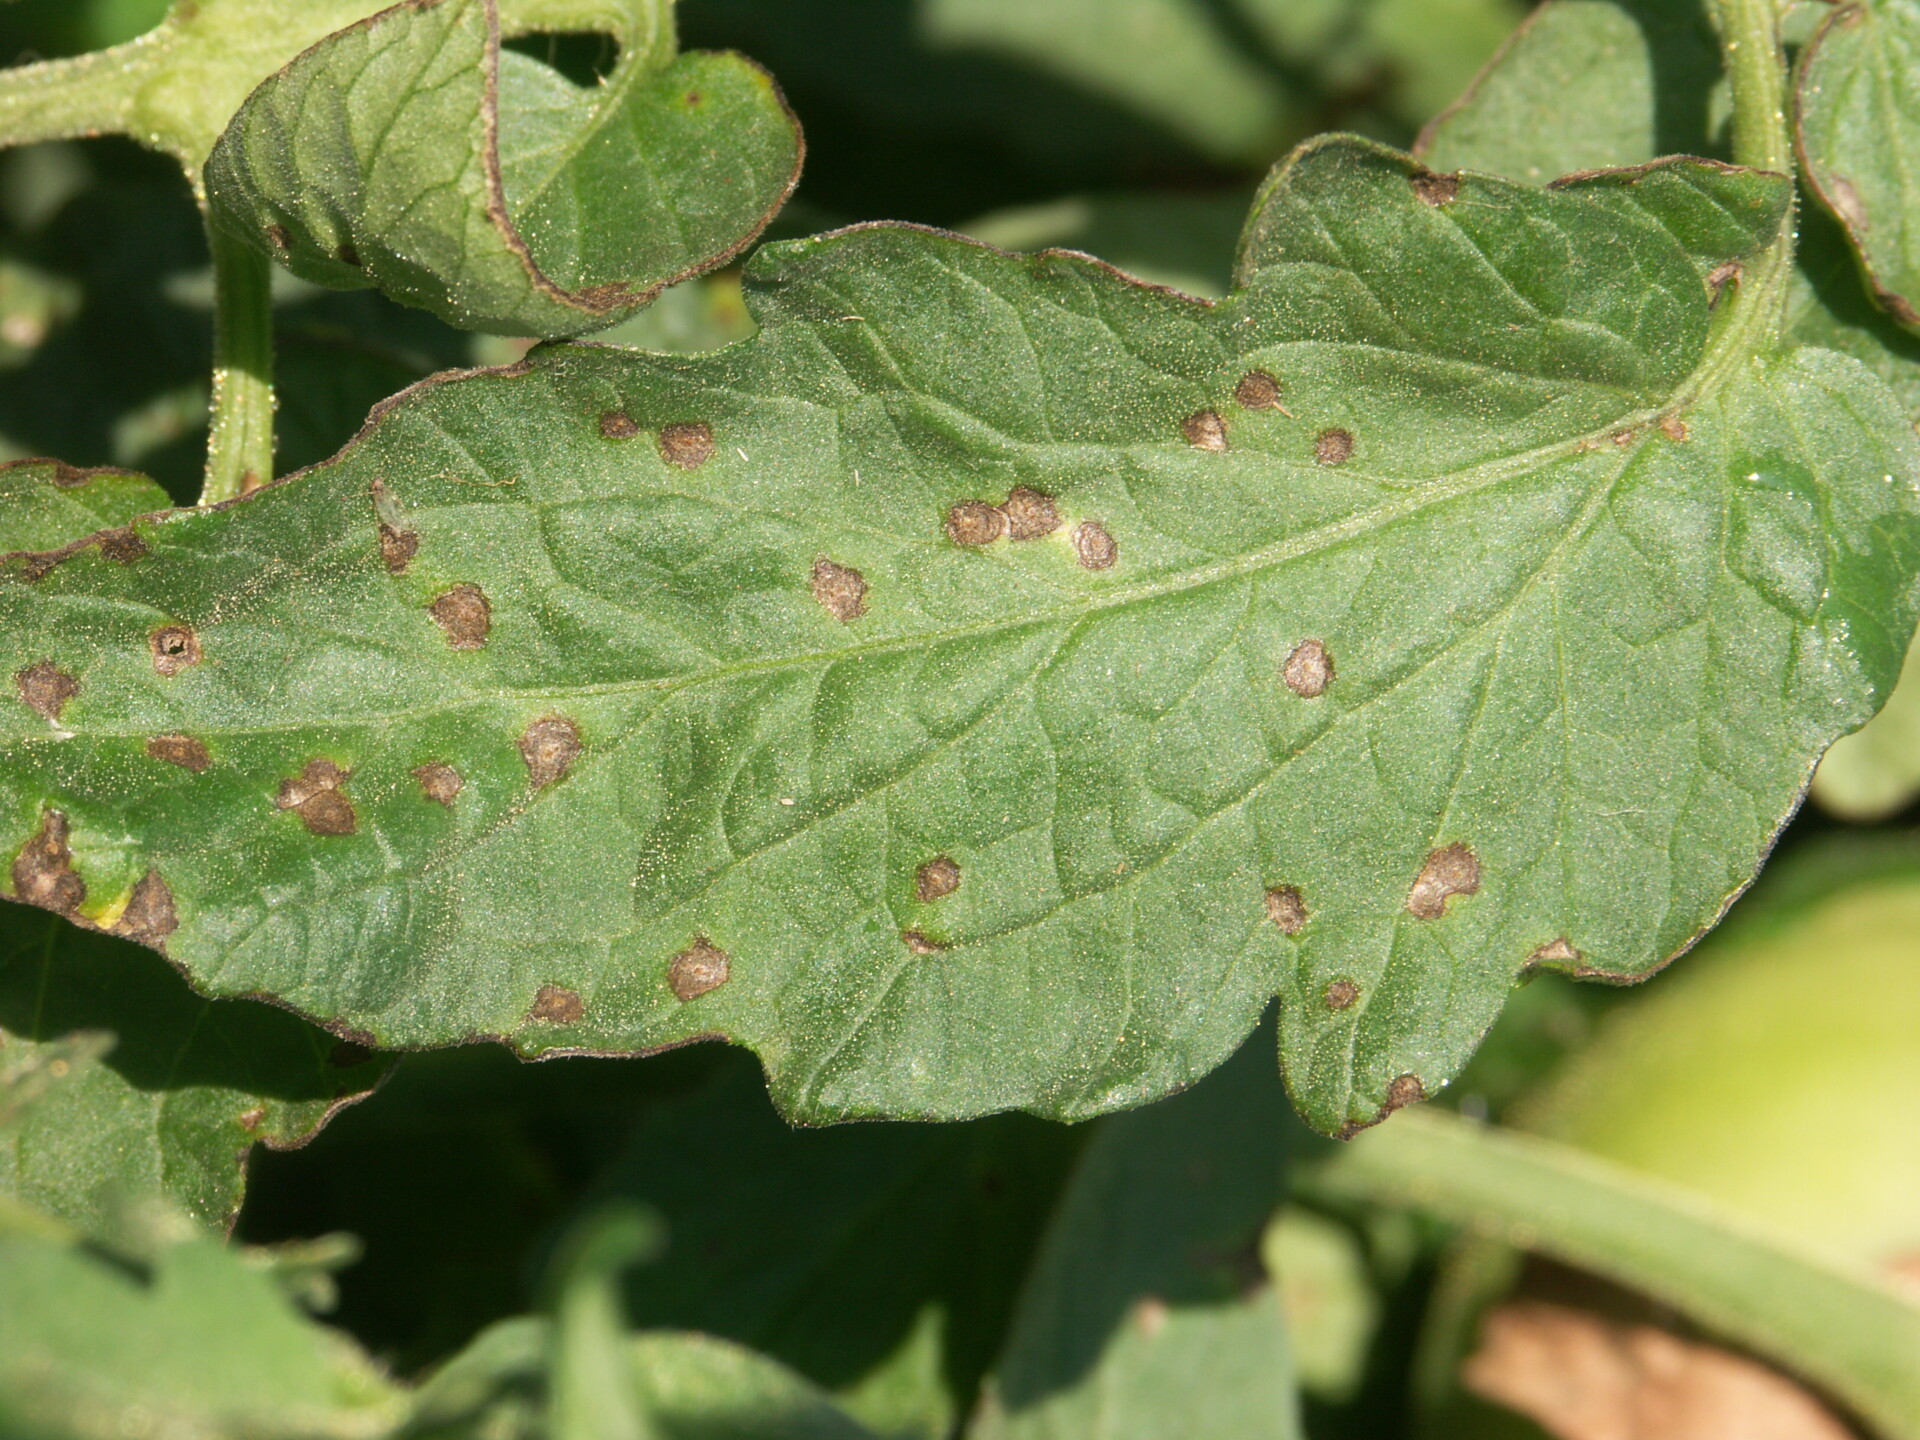 Figure 8. Note ring structure of early blight of tomato lesions.